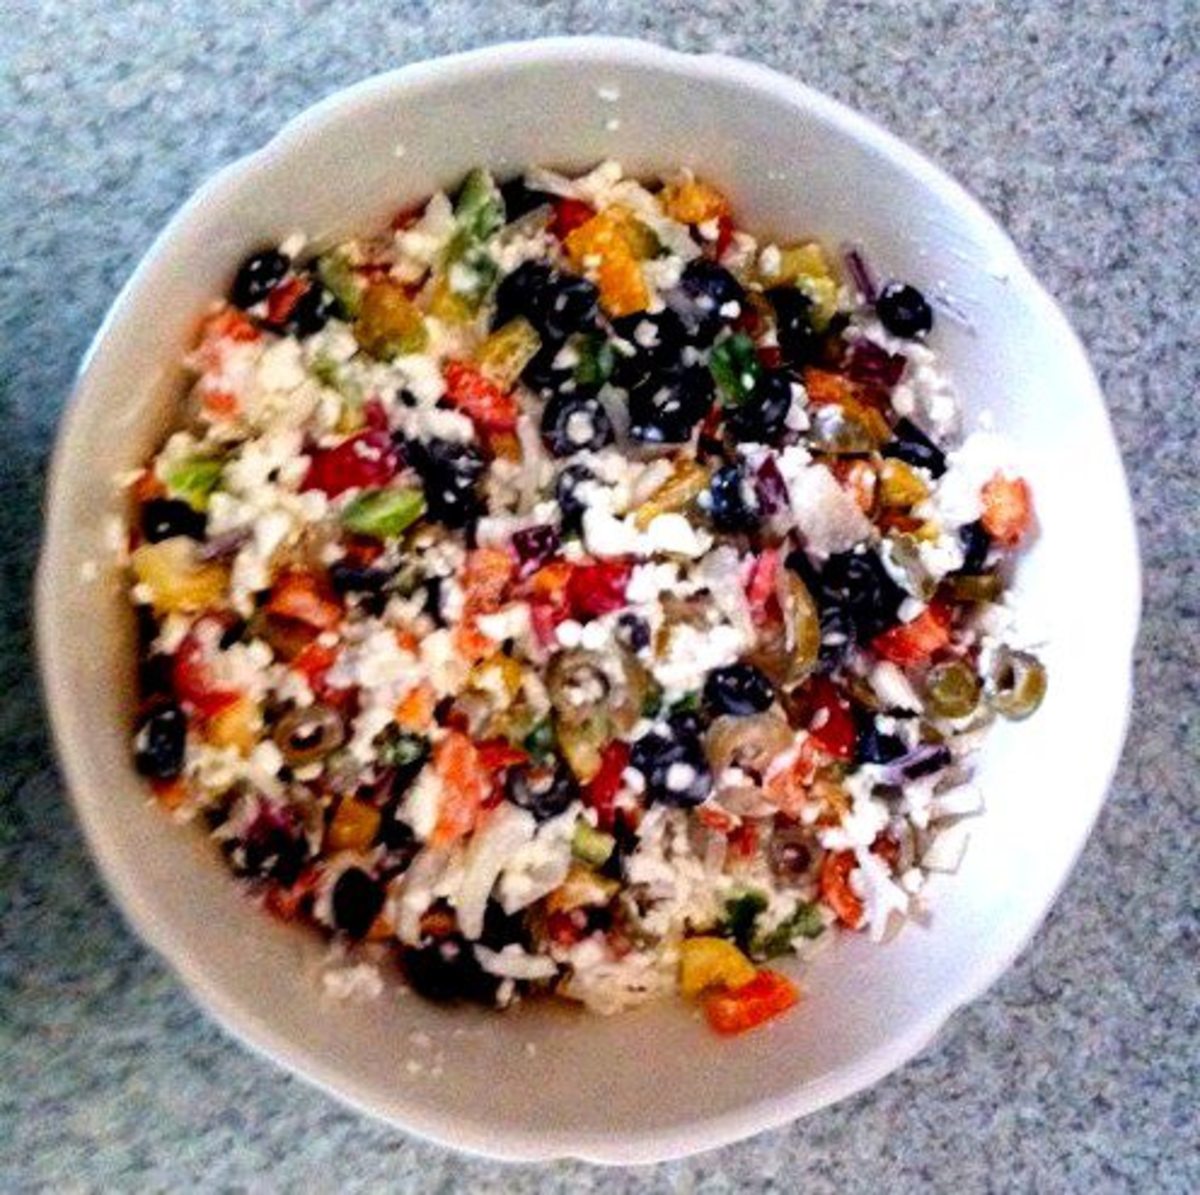 You now have a colorful cottage cheese salad that everyone will enjoy.